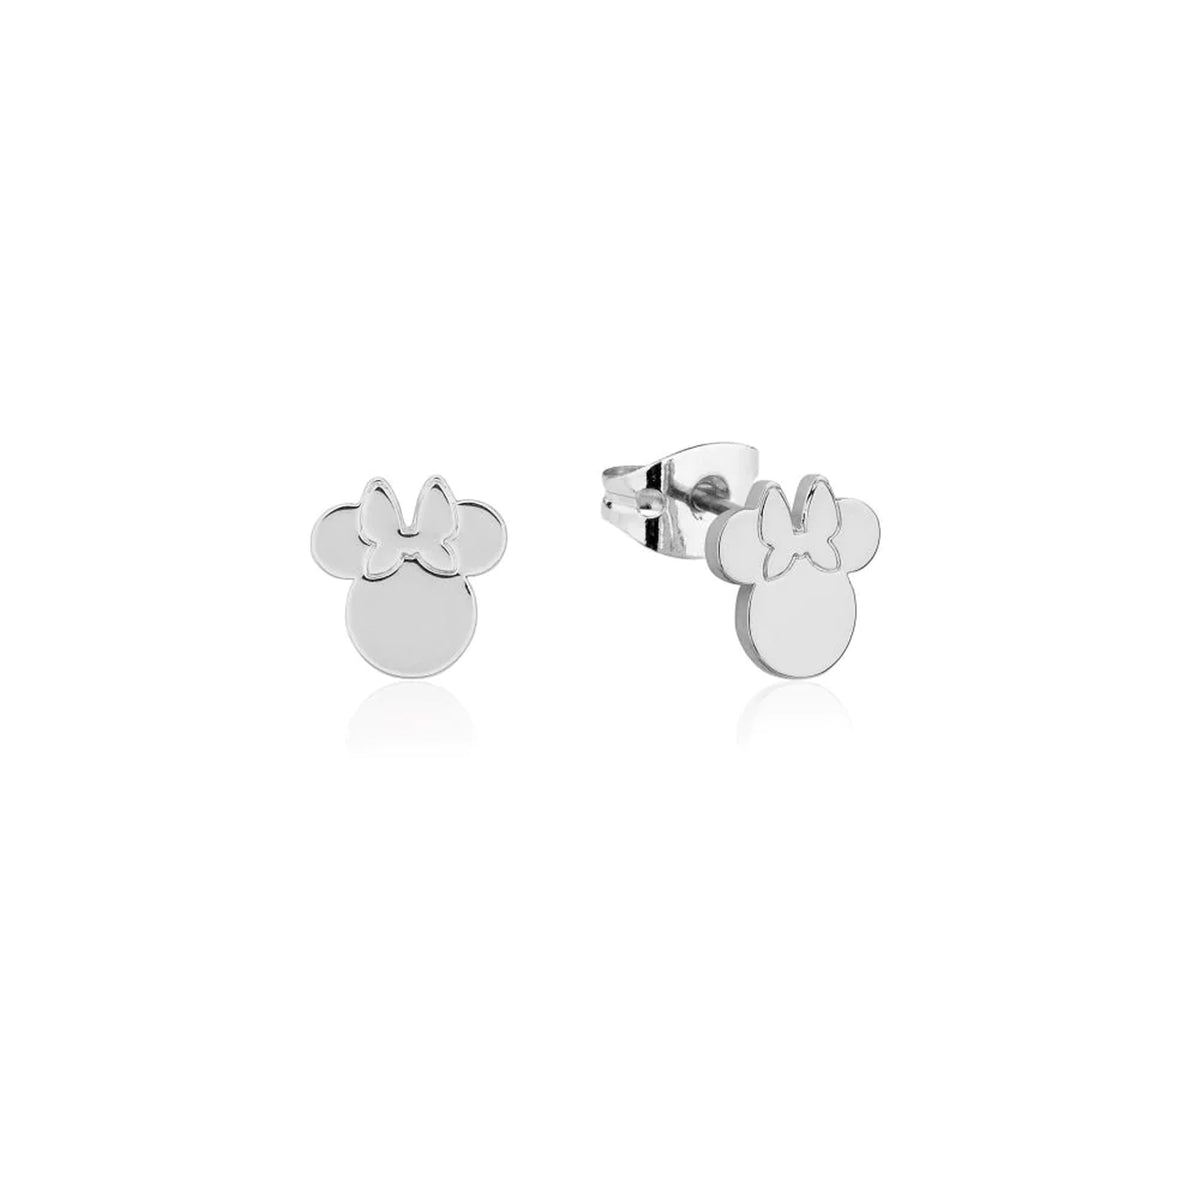 Disney Minnie Mouse Stud Earrings - White Gold